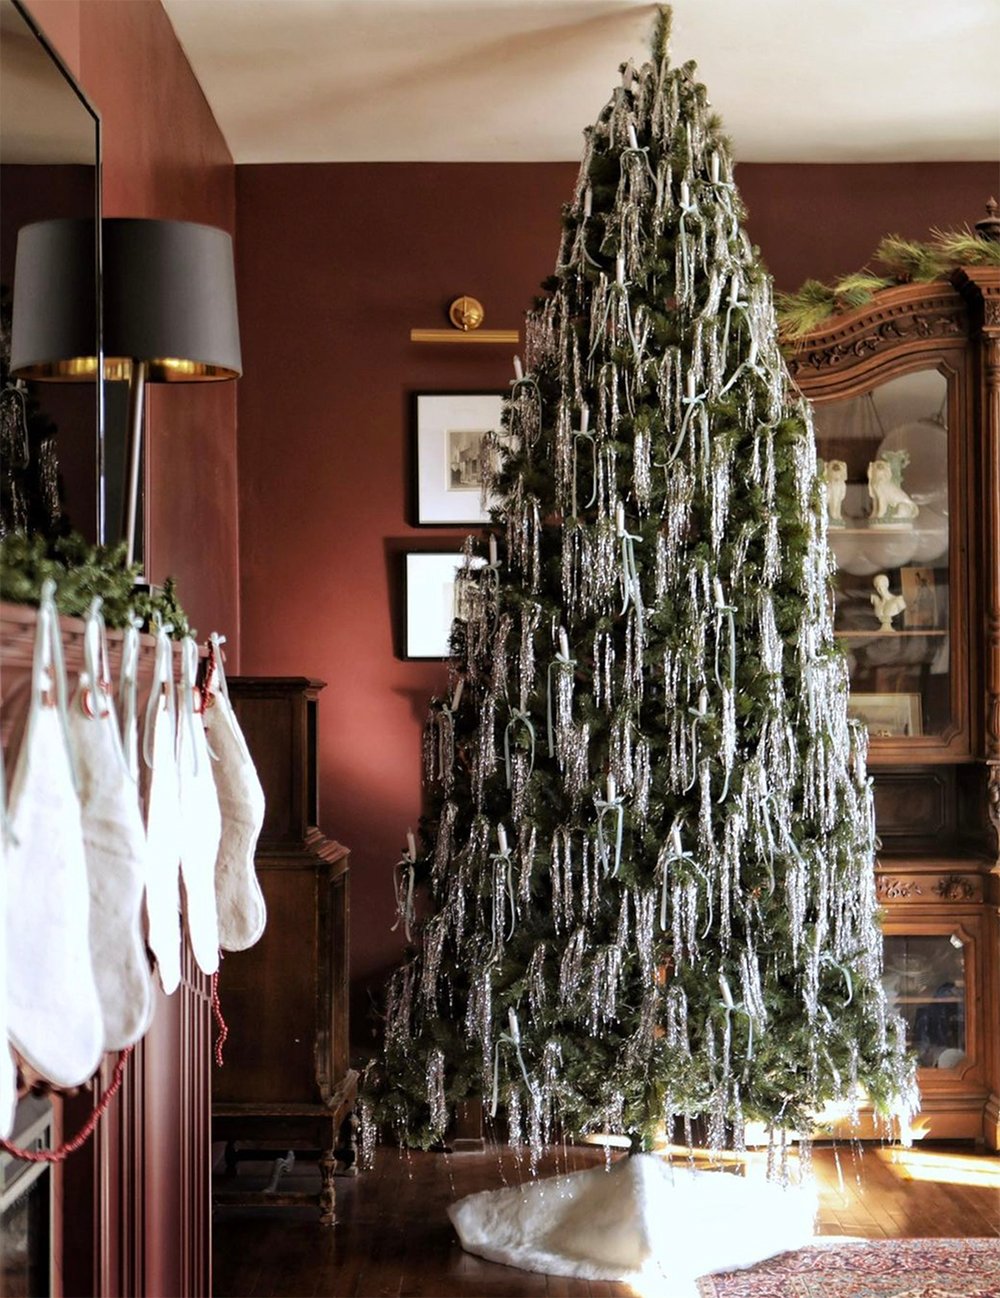 10 Holiday & Winter Vignettes to Admire - roomfortuesday.com